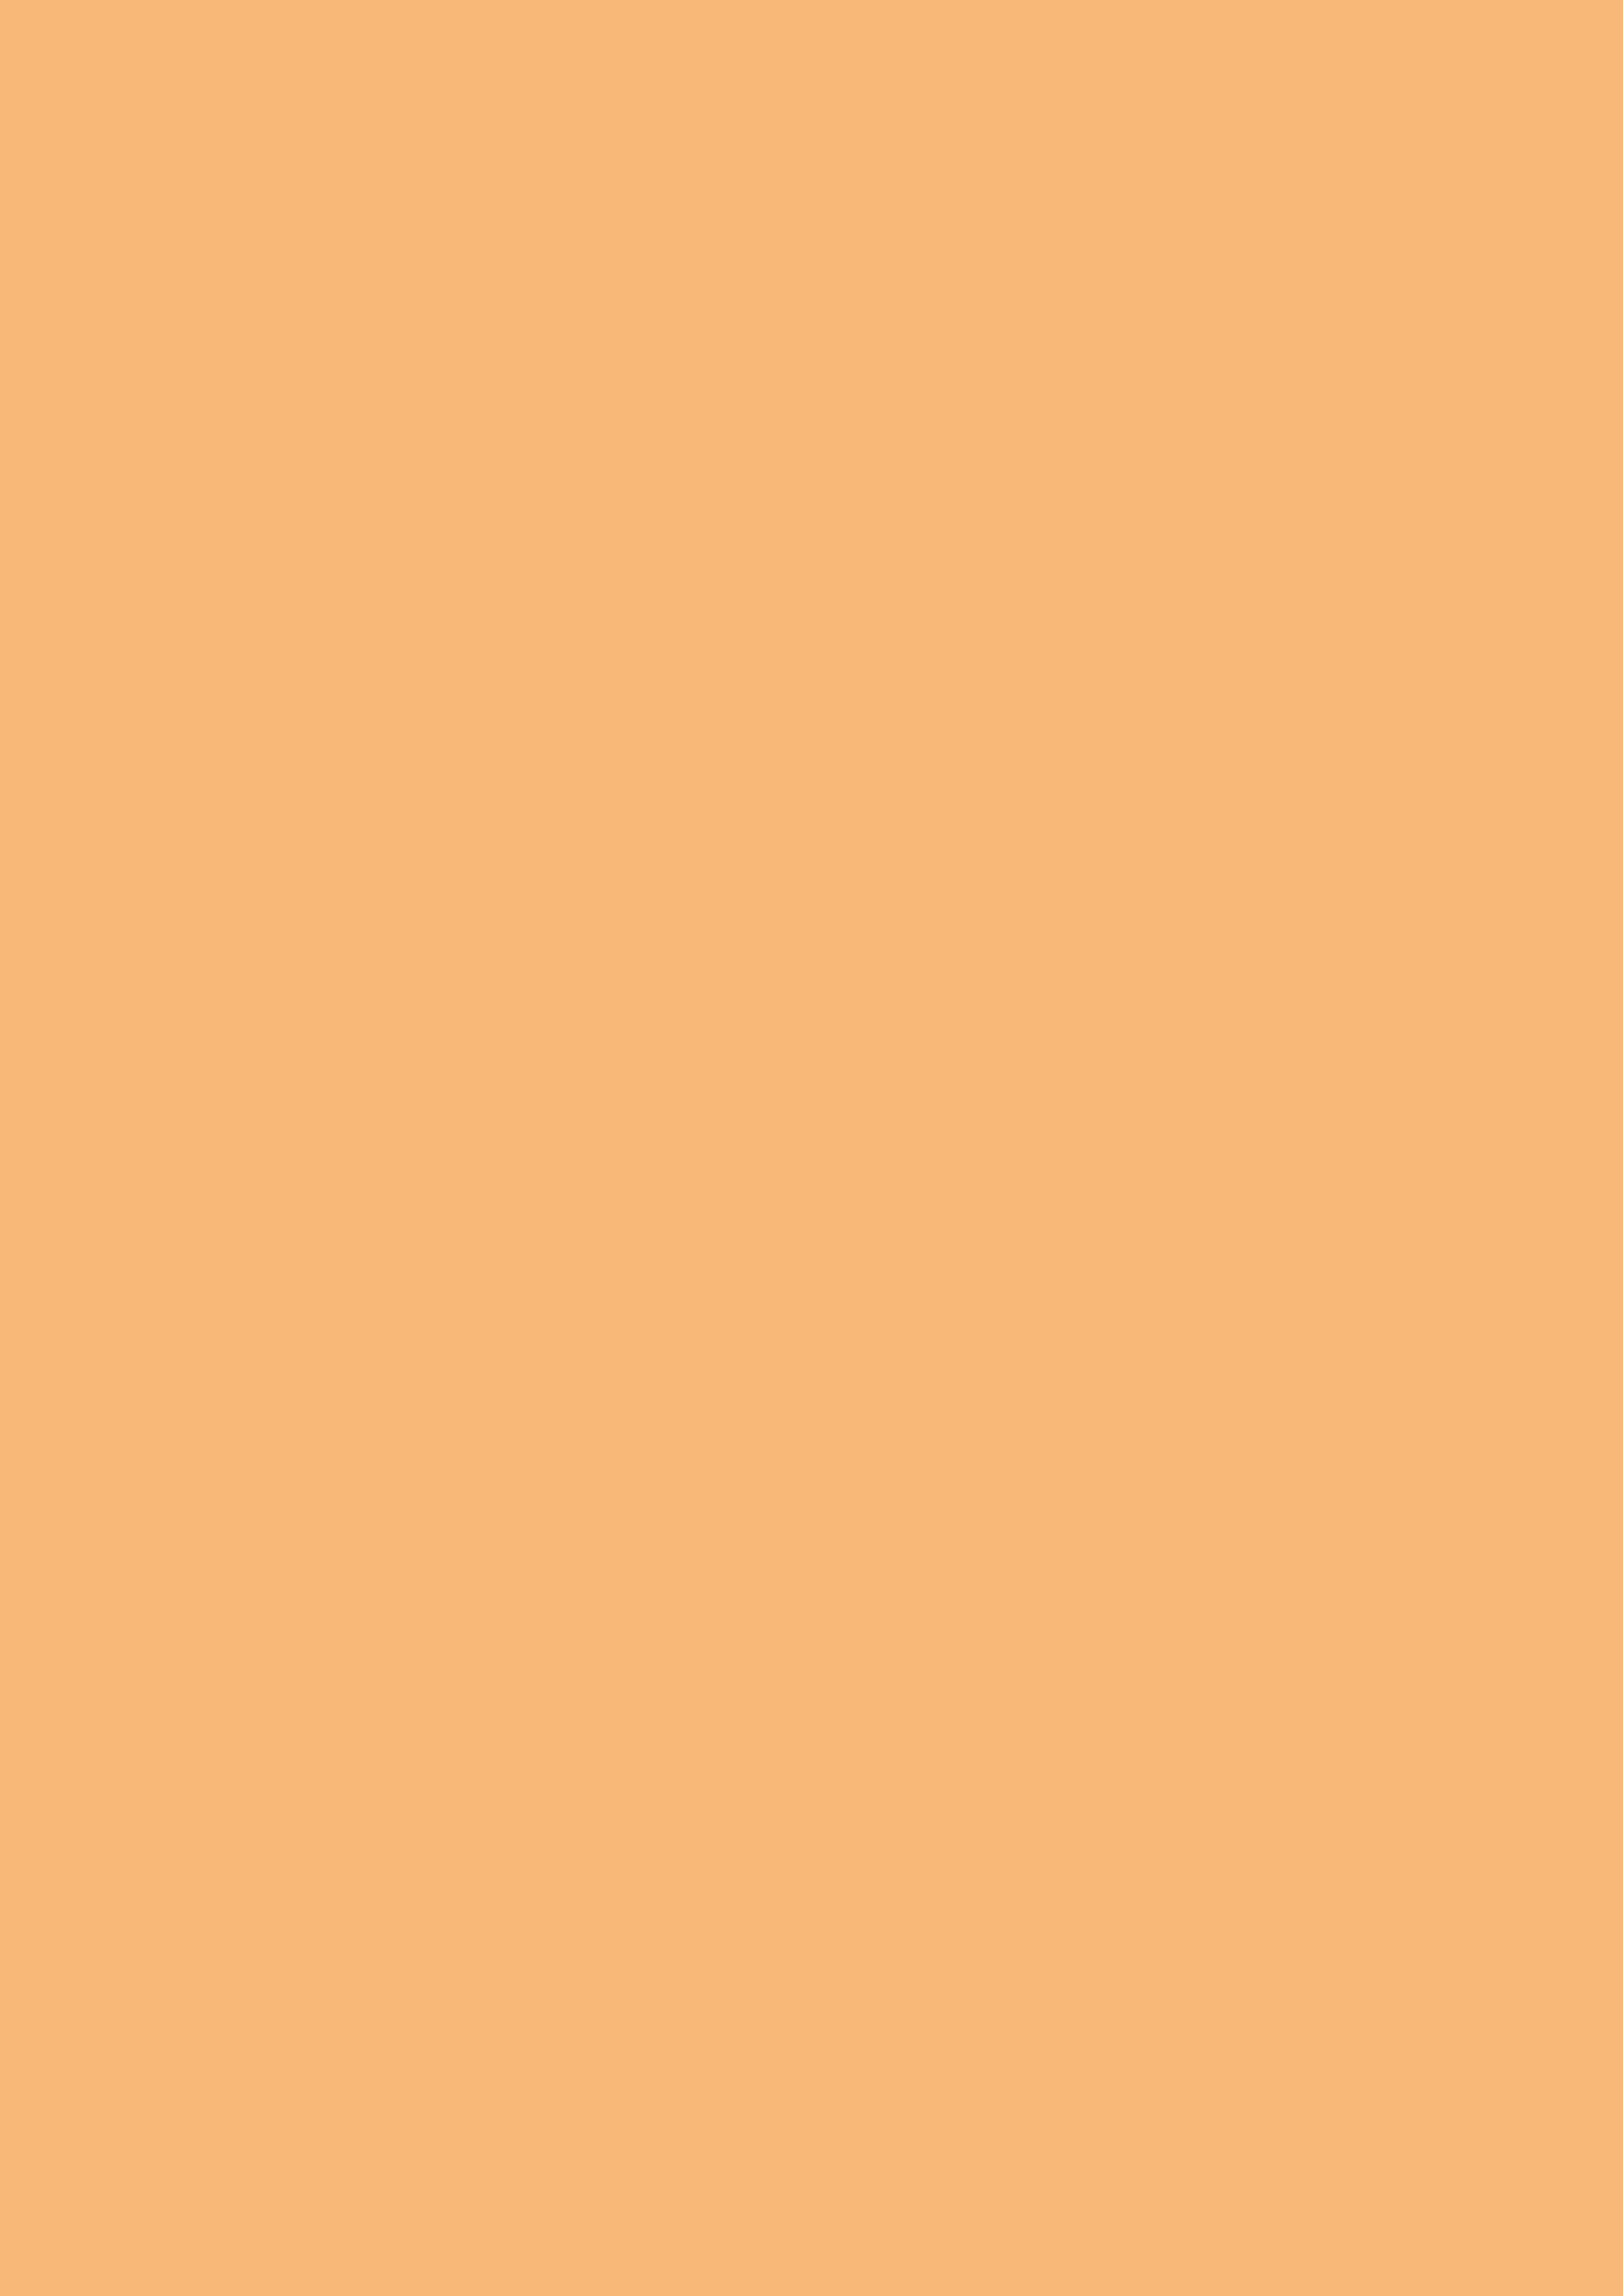 2480x3508 Mellow Apricot Solid Color Background